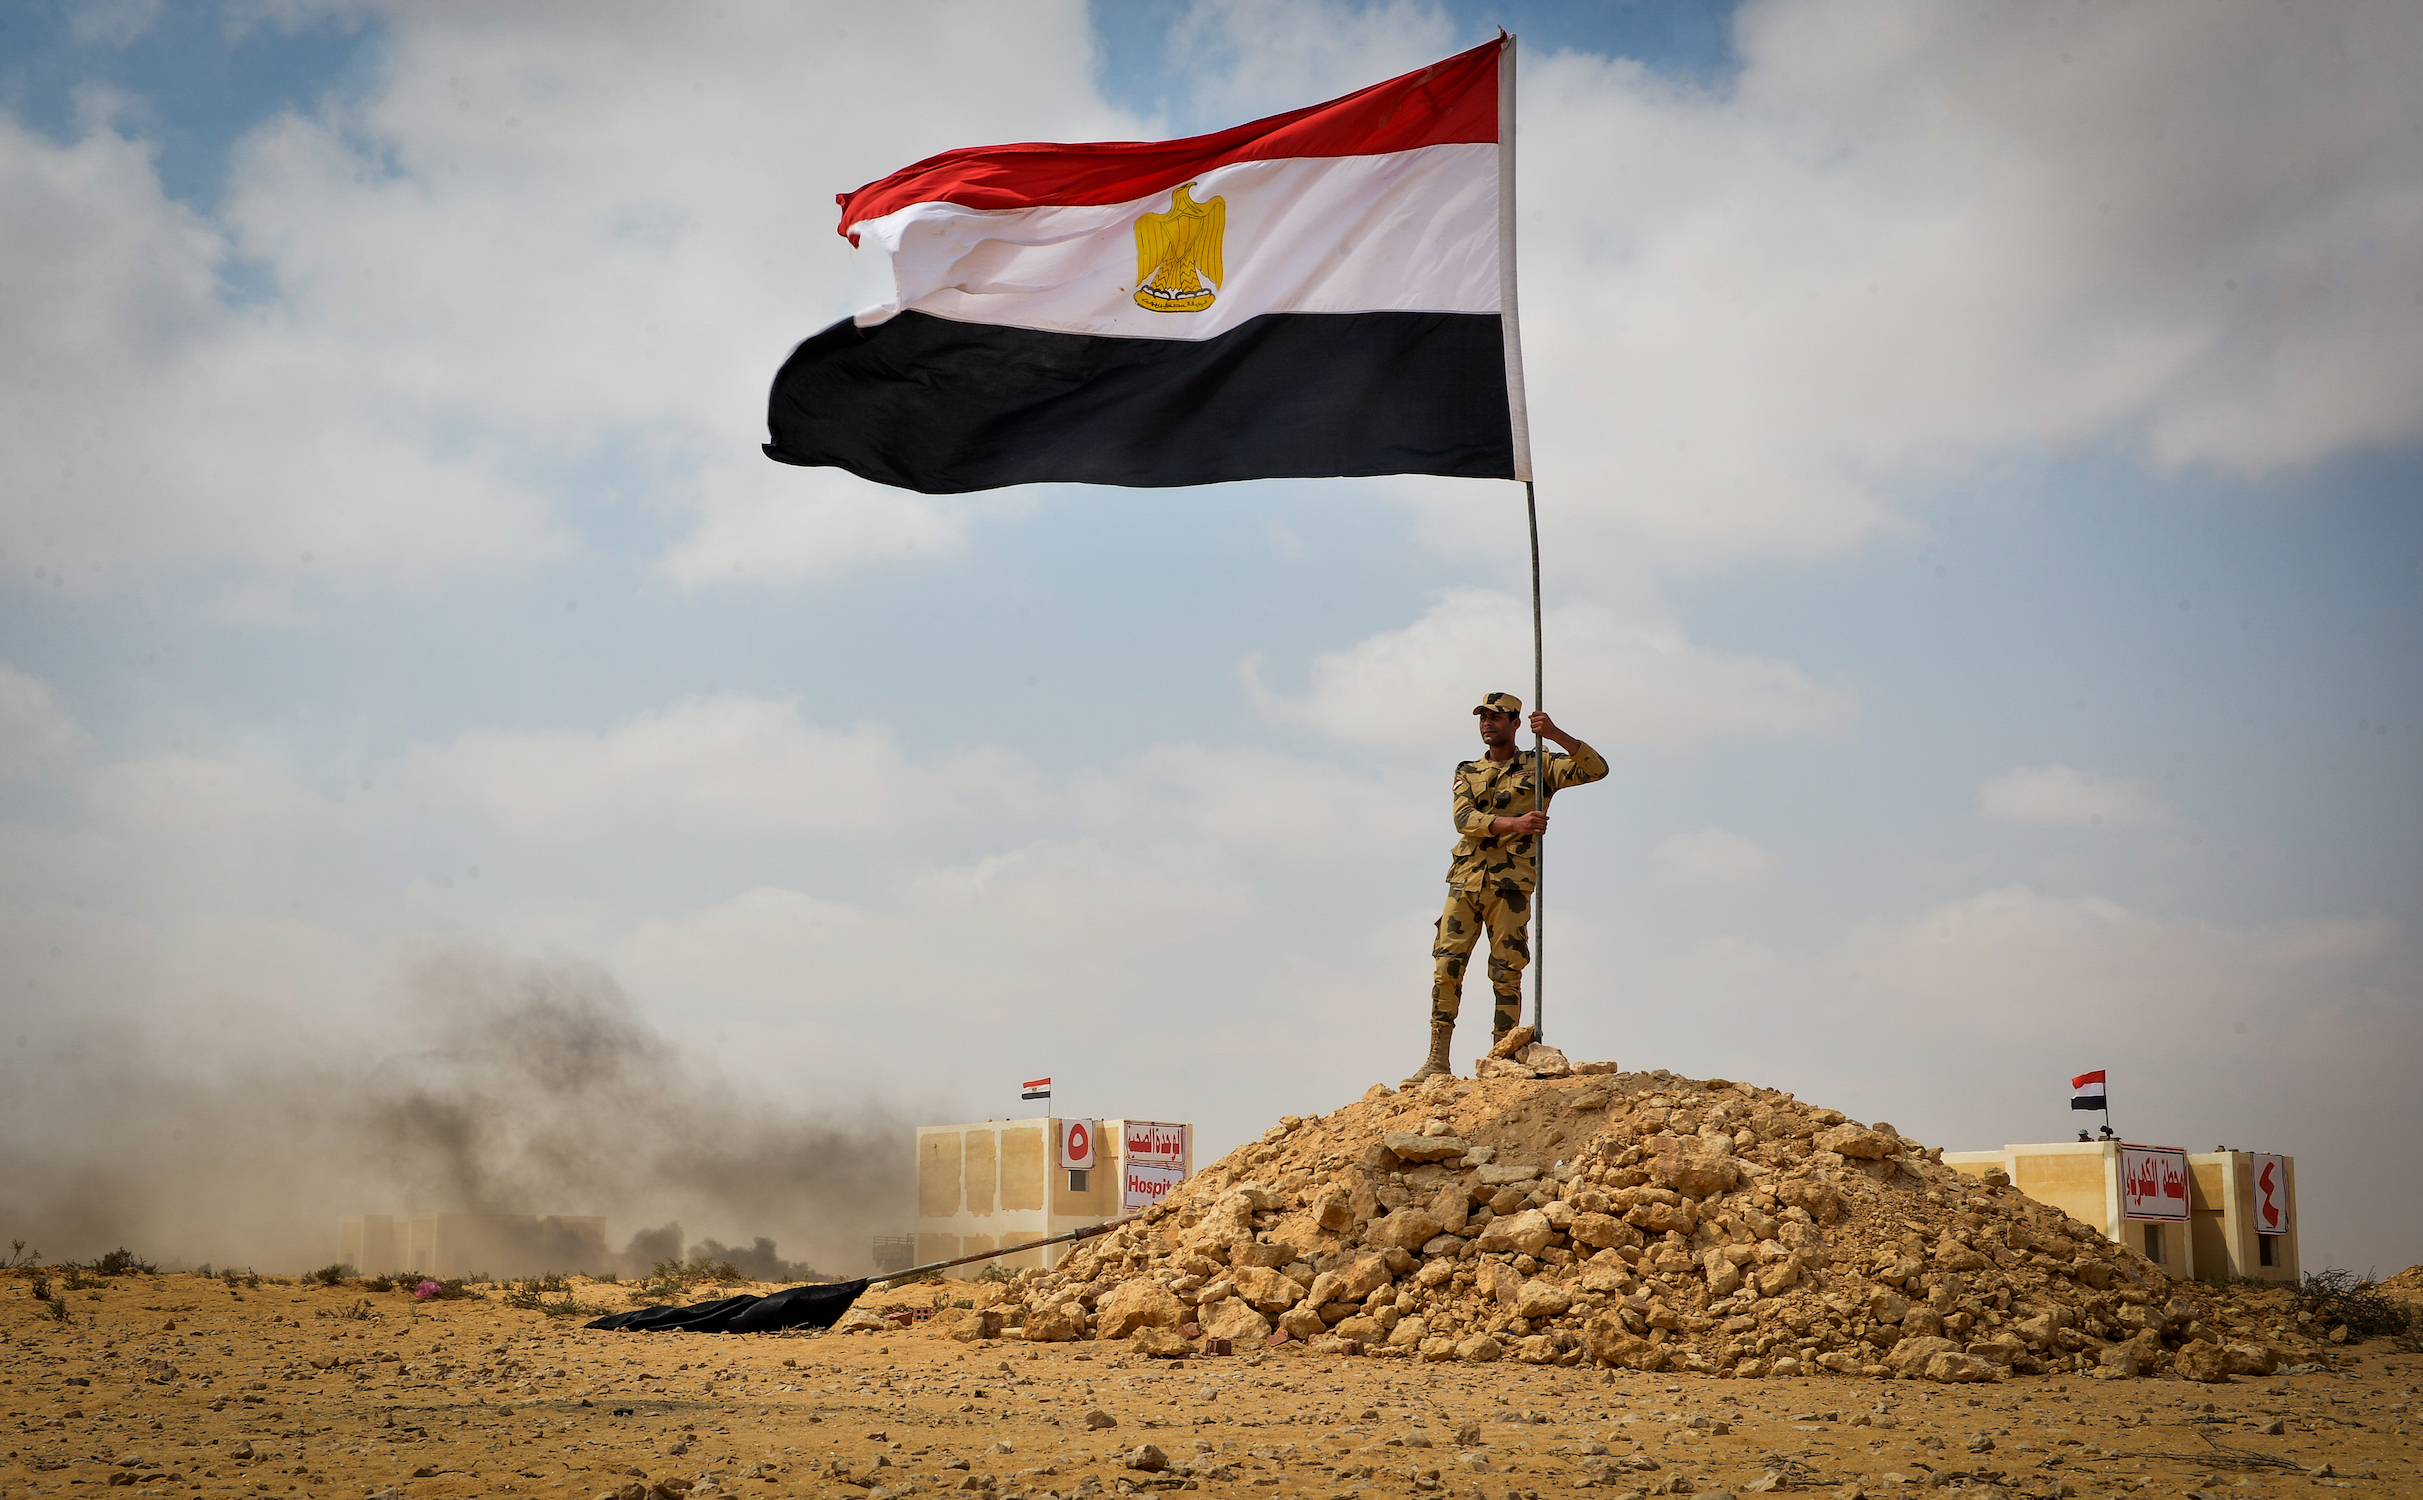 Egyptian soldier with the national flag